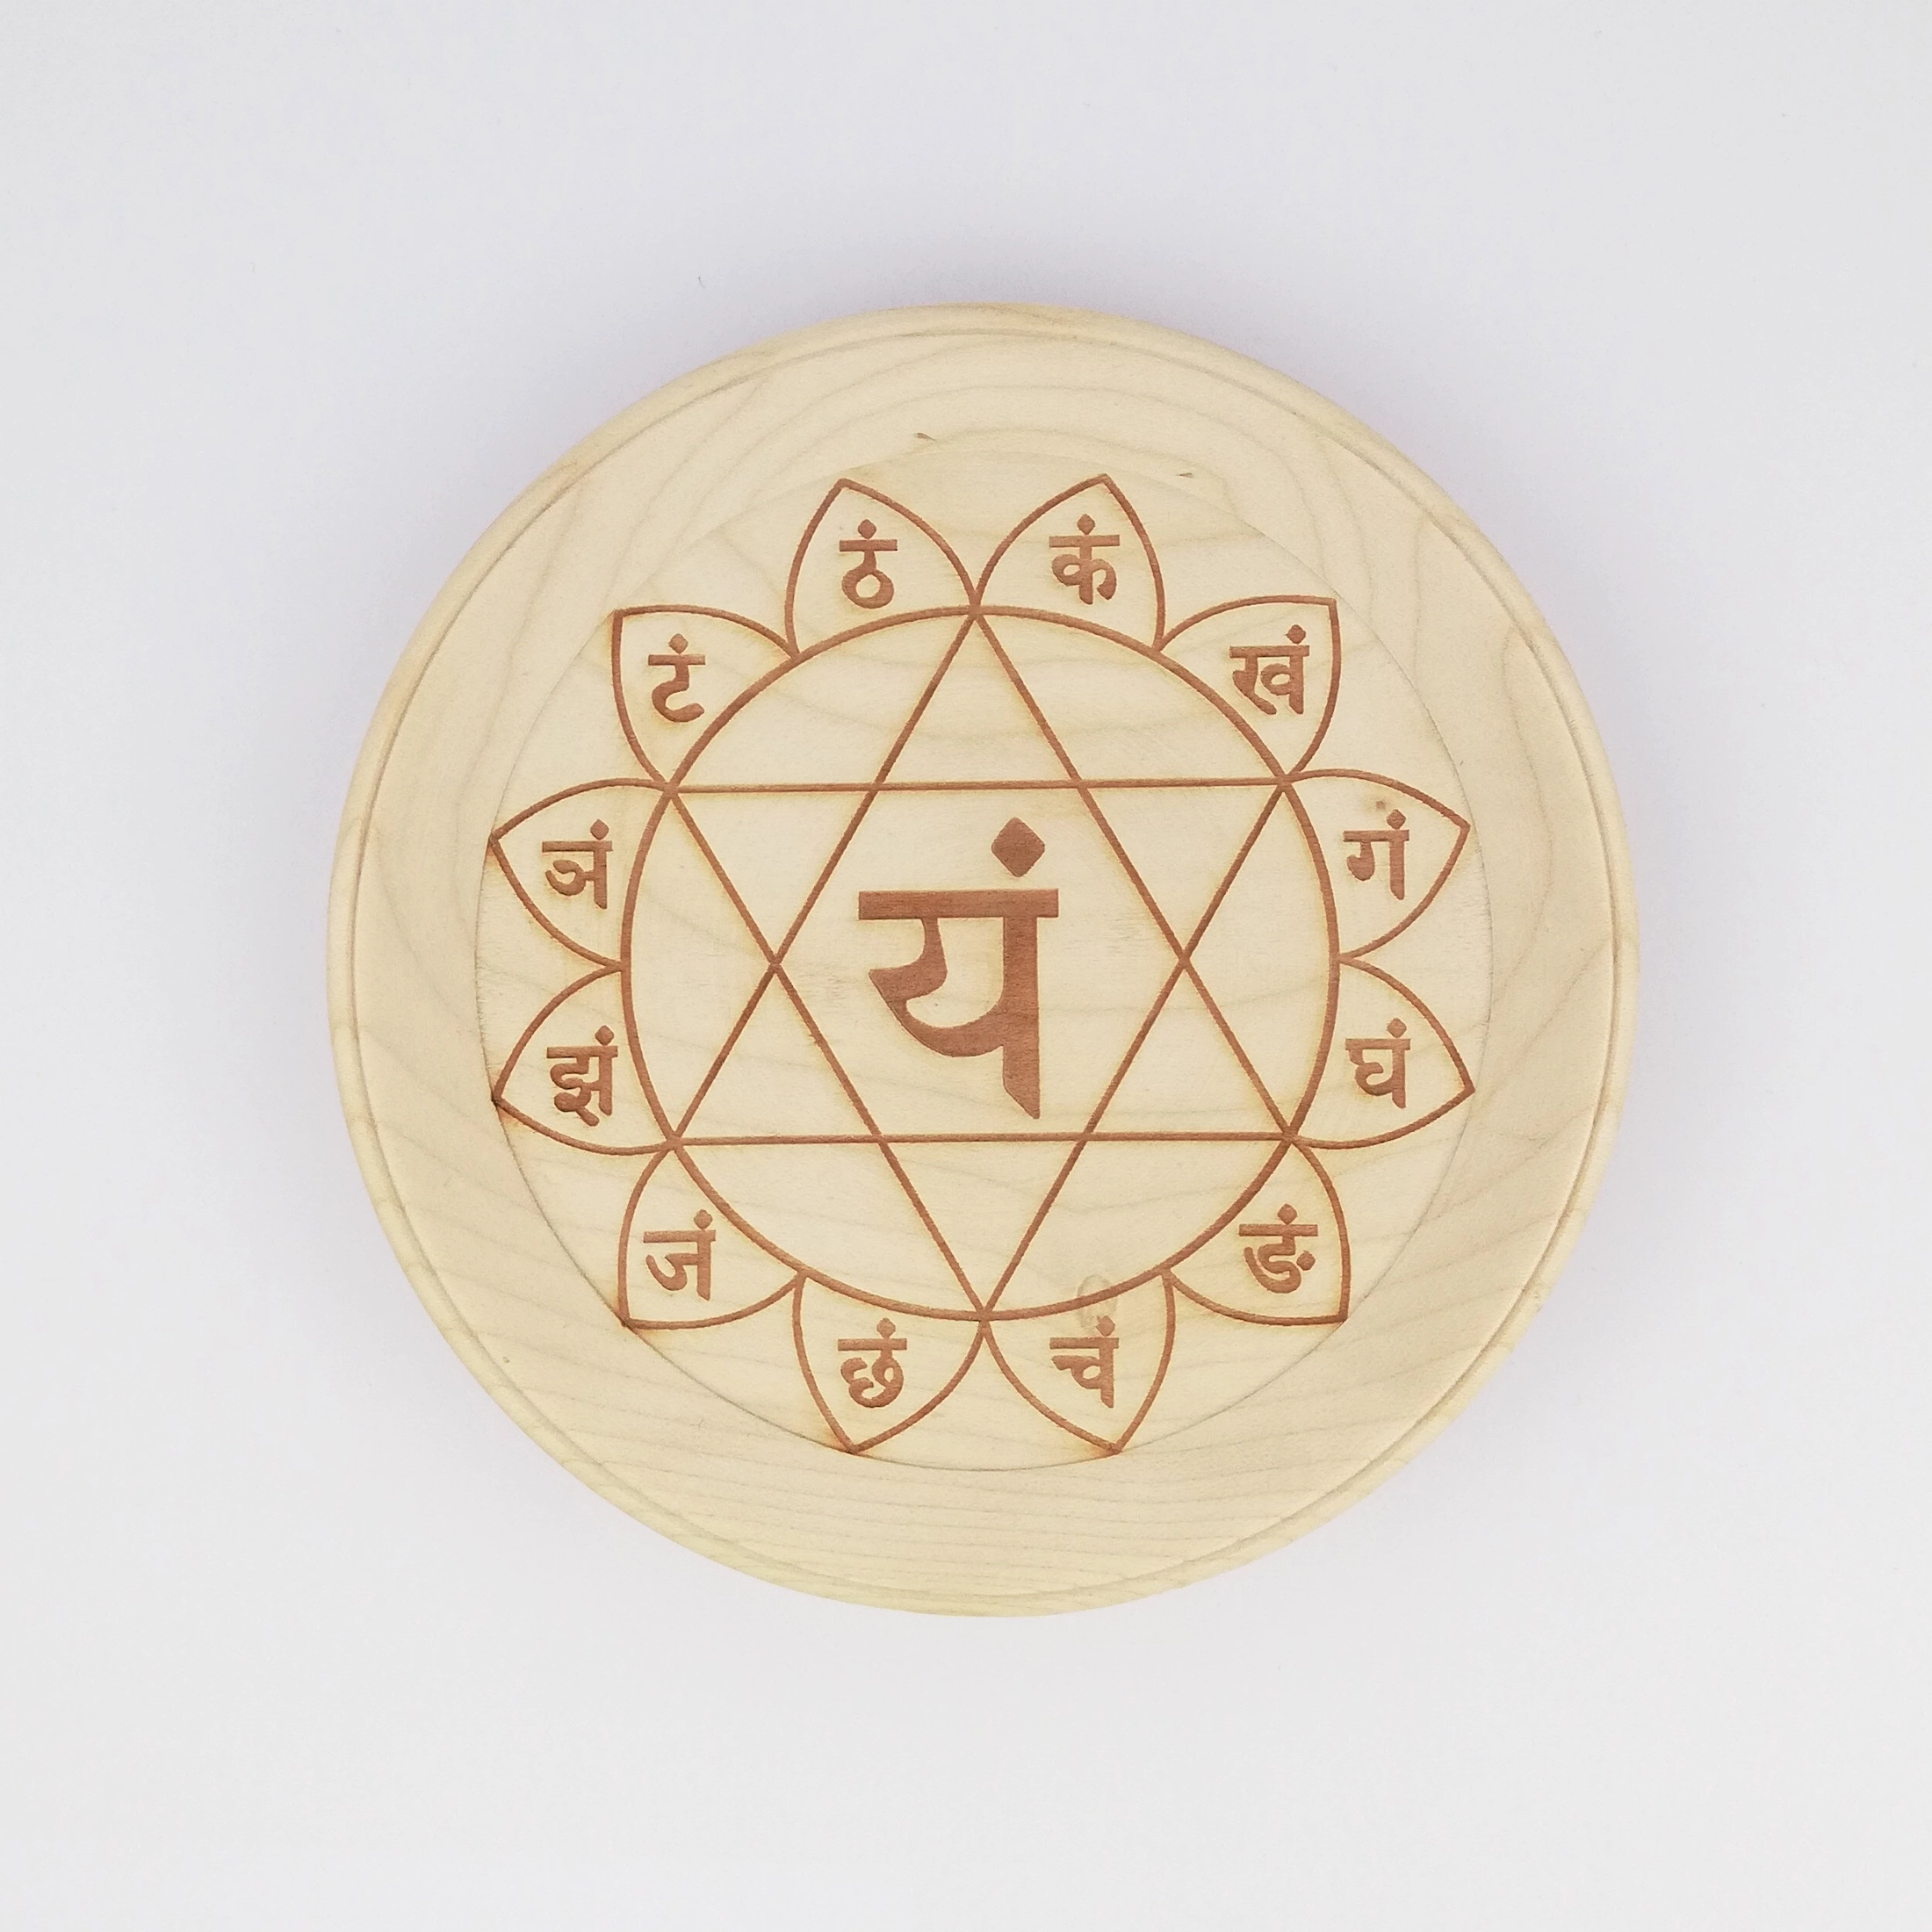 Heart chakra on a small plate (16cm/6.3in in diameter), front.